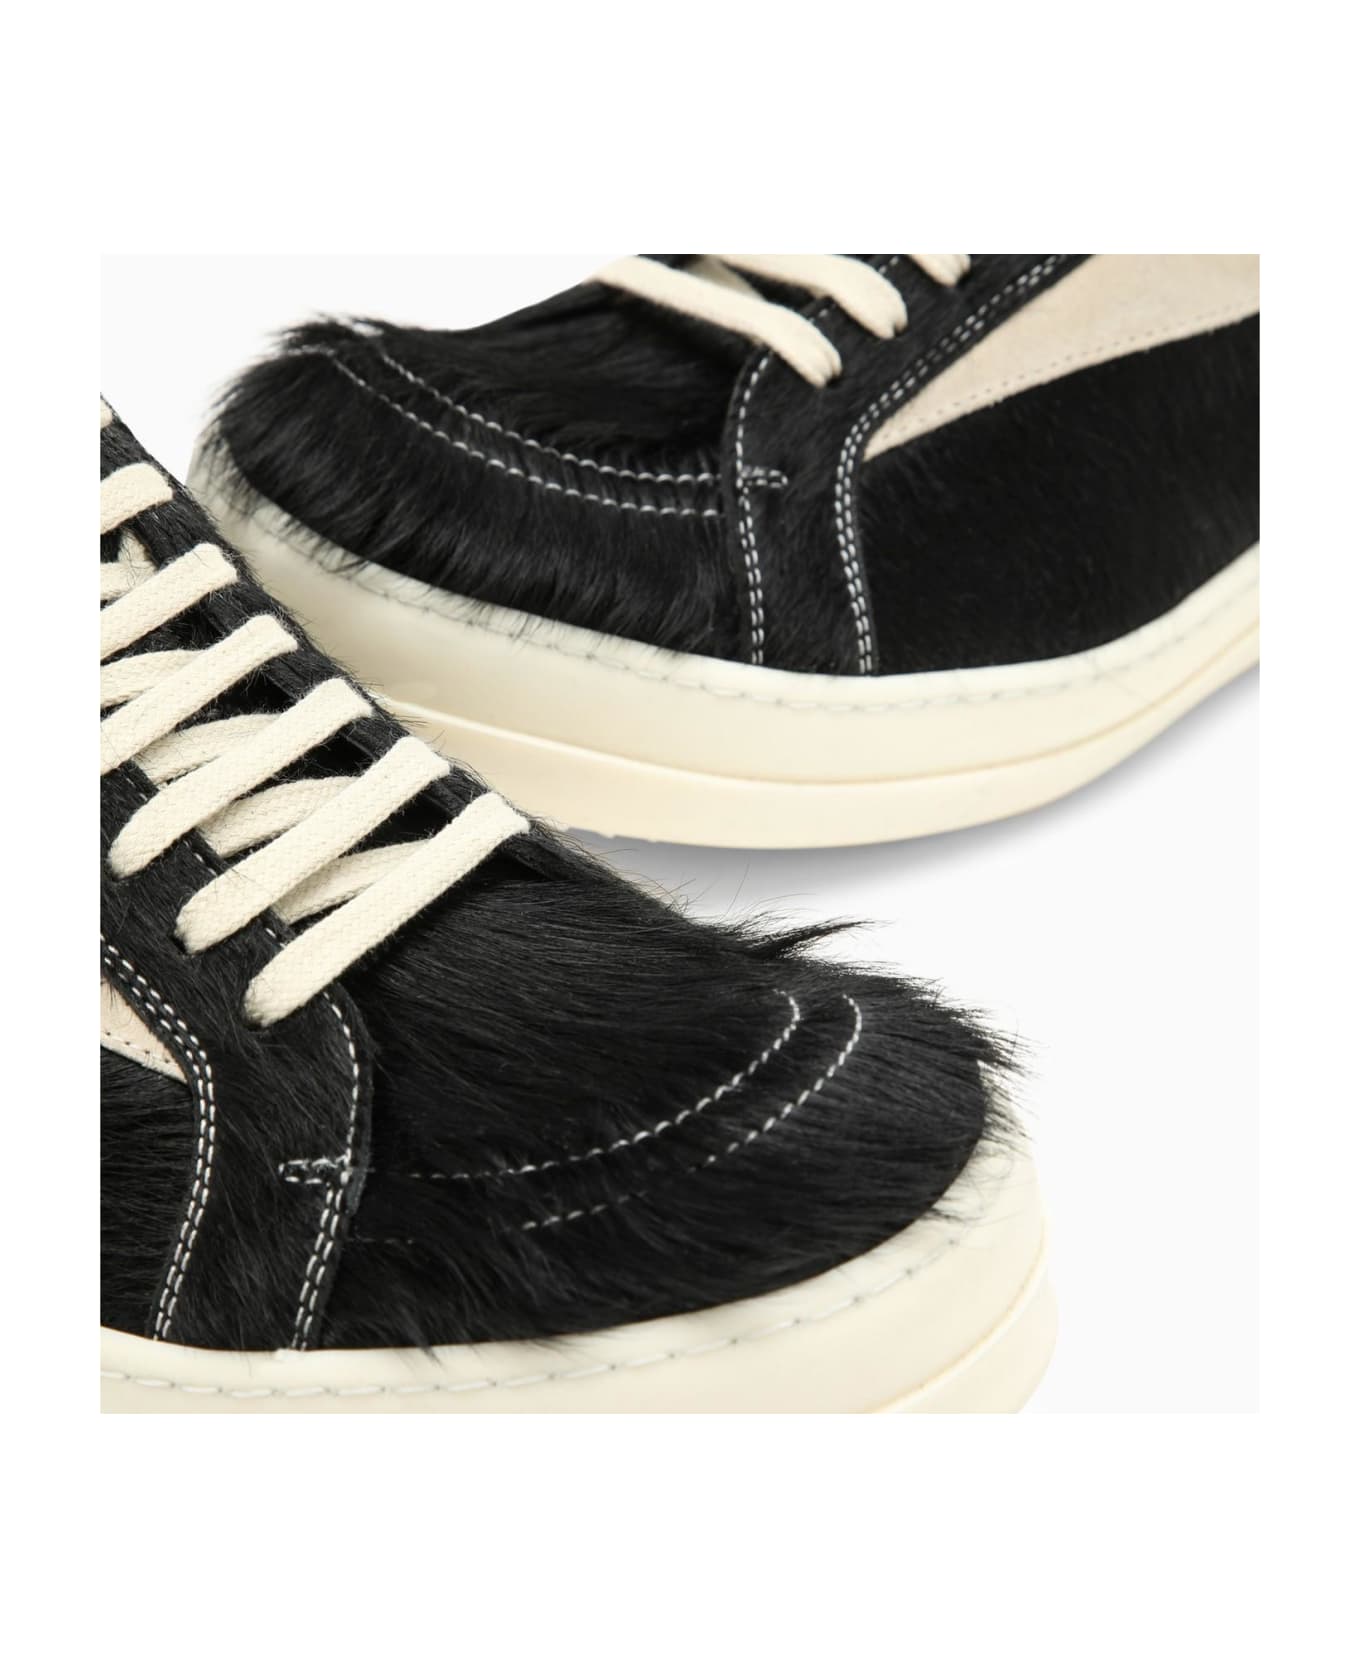 Rick Owens Black\/white Sneaker In Leather With Fur - Black Milk